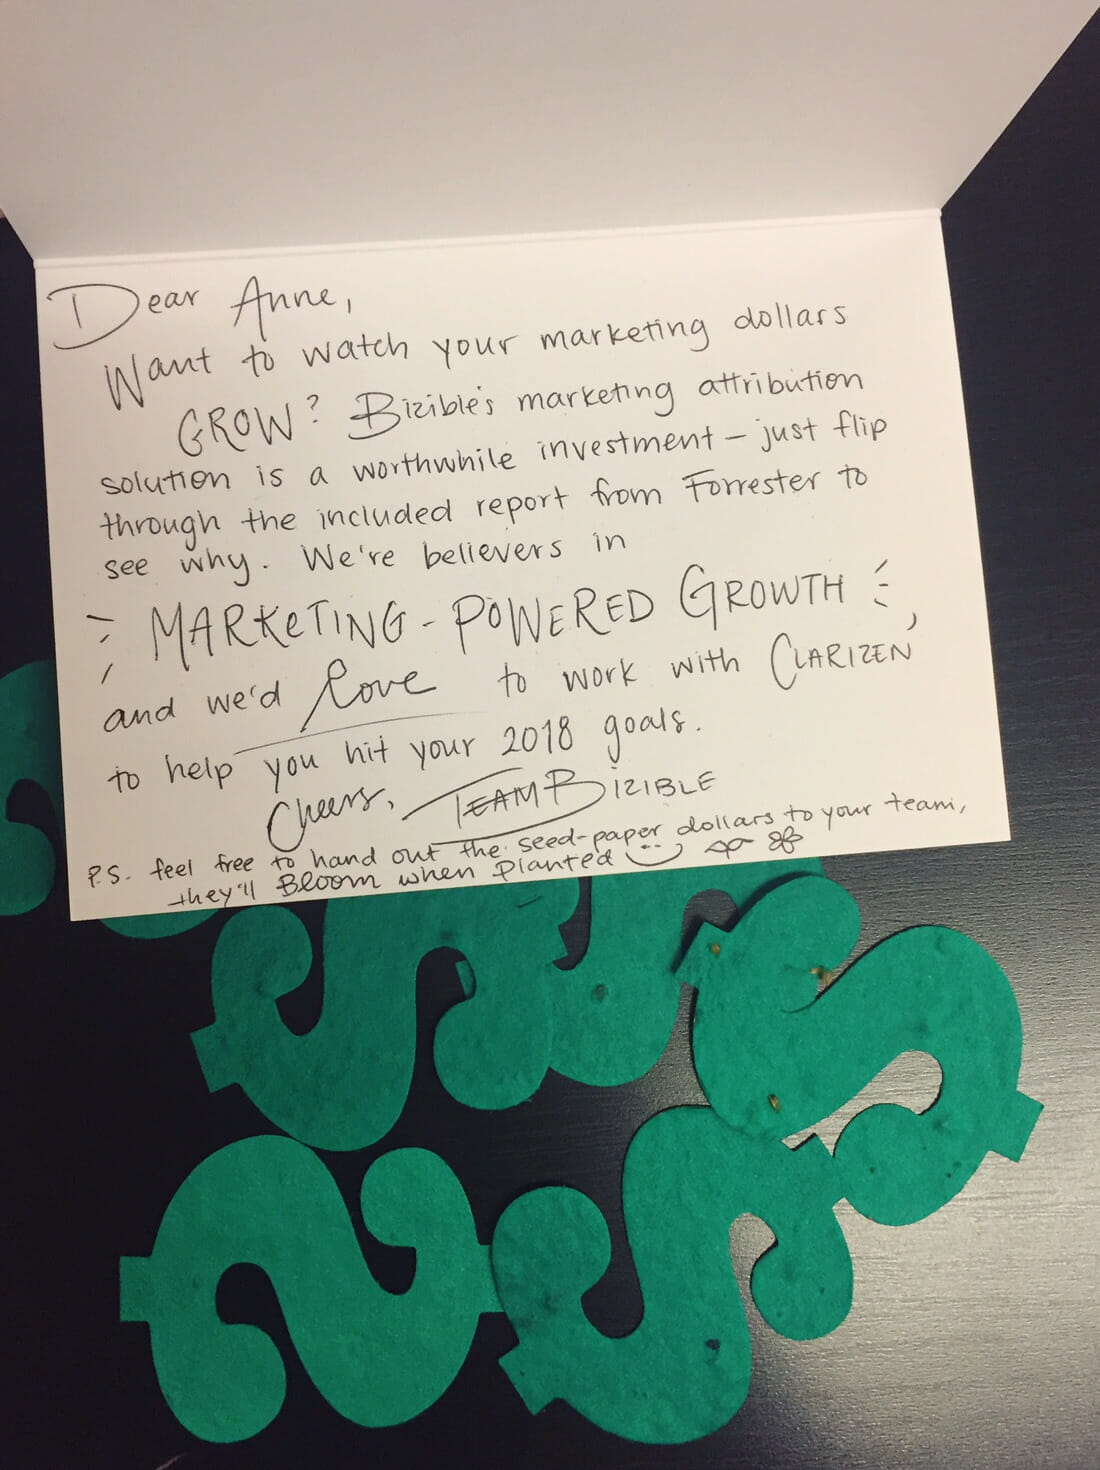 Photo of Bizible personalized card sent to a customer as an example using an ABM approach